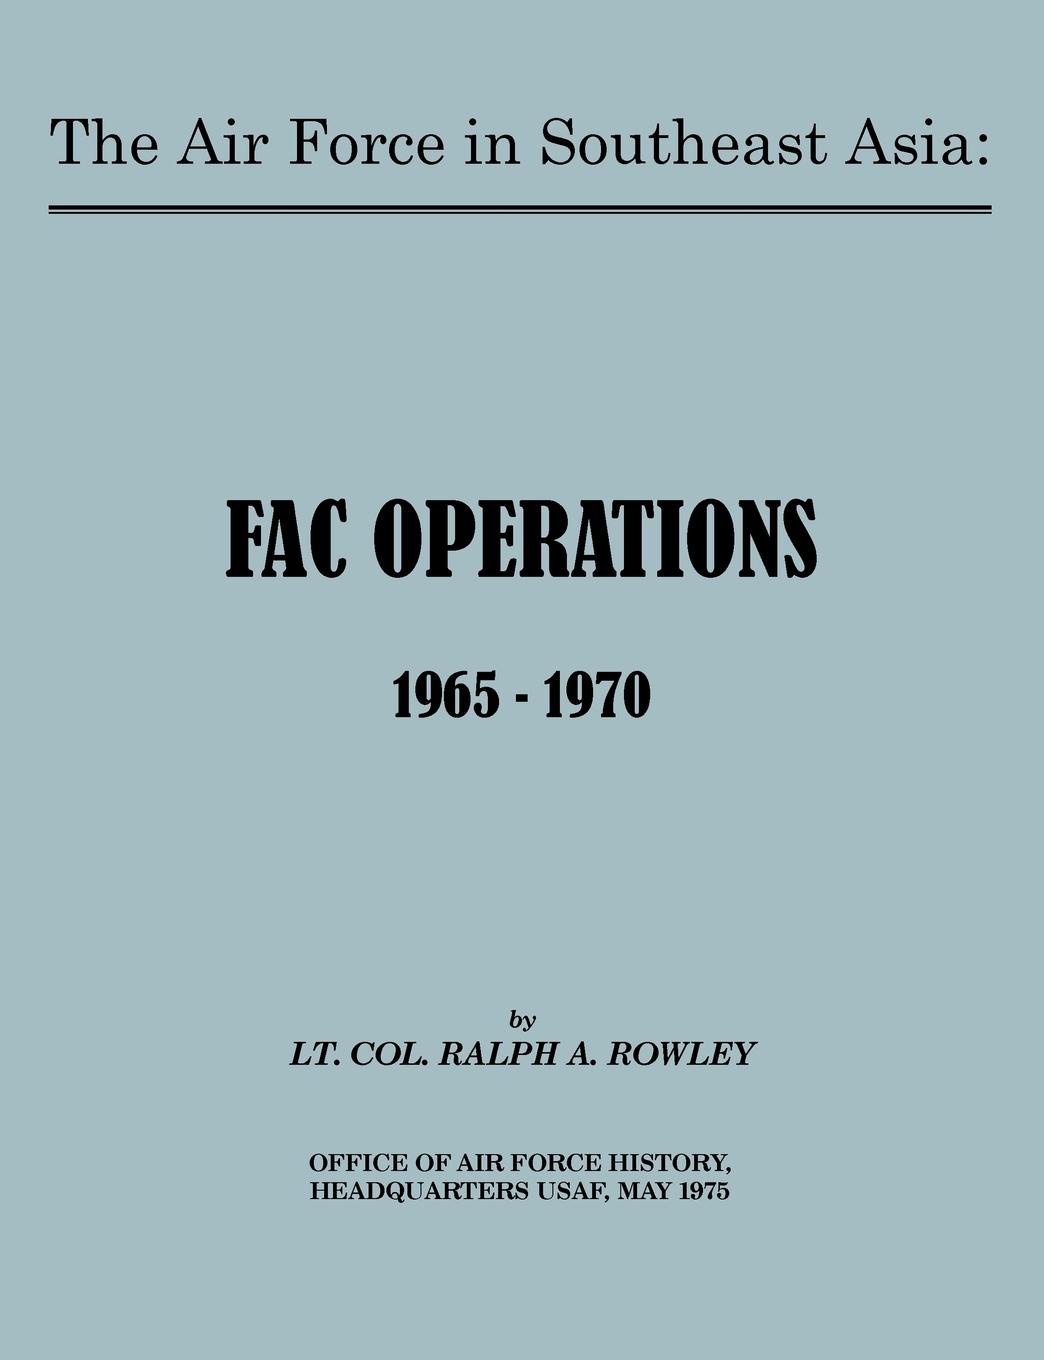 Ralph A. Rowley, U.S. Office of Air Force History The Air Force in Southeast Asia. FAC Operations 1965-1970